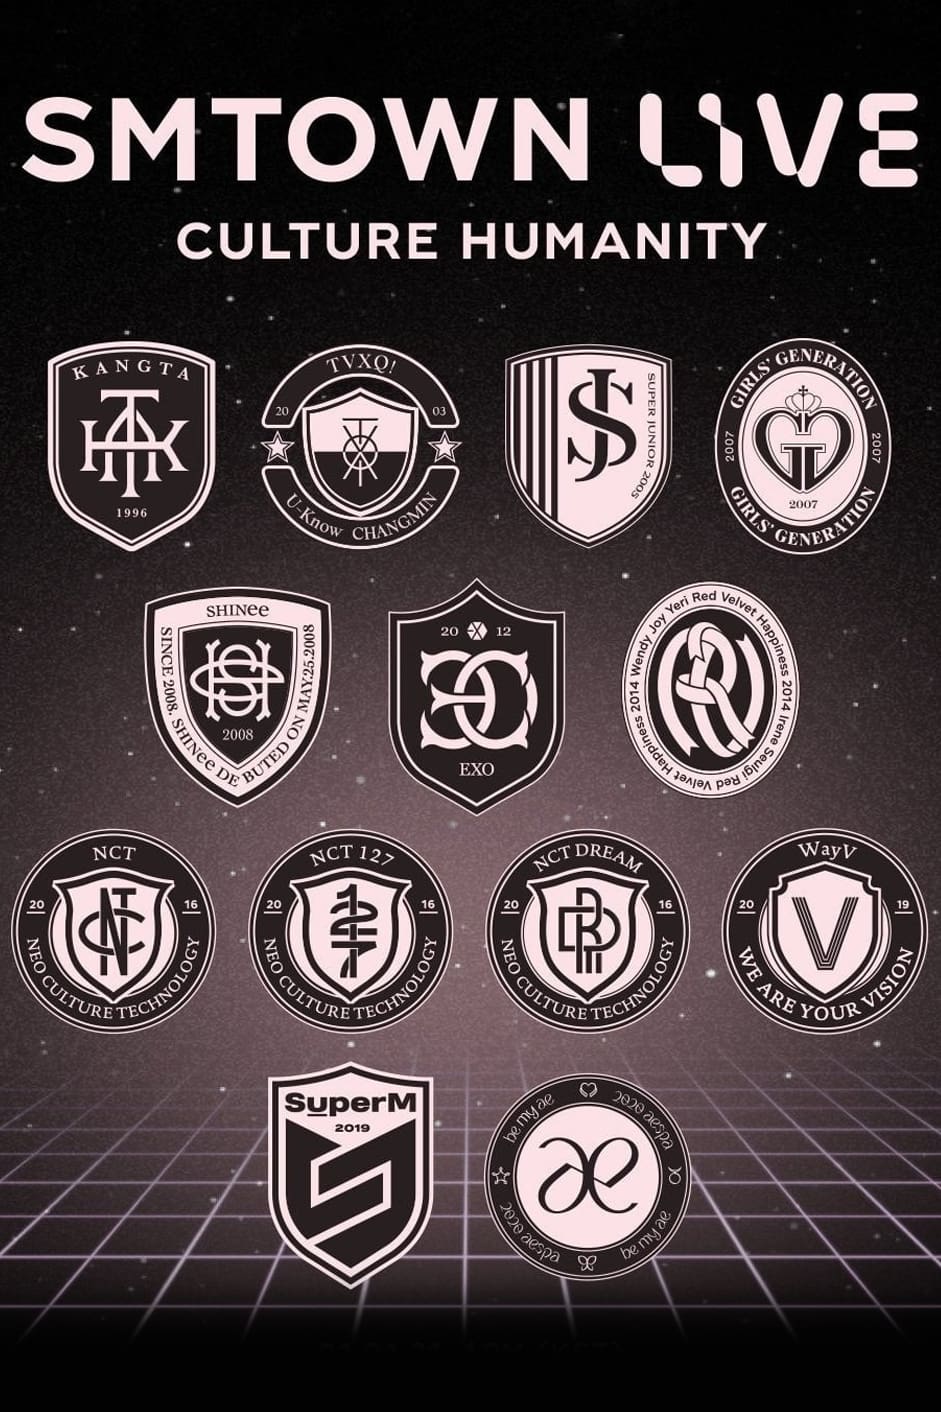 SMTOWN LIVE "Culture Humanity"